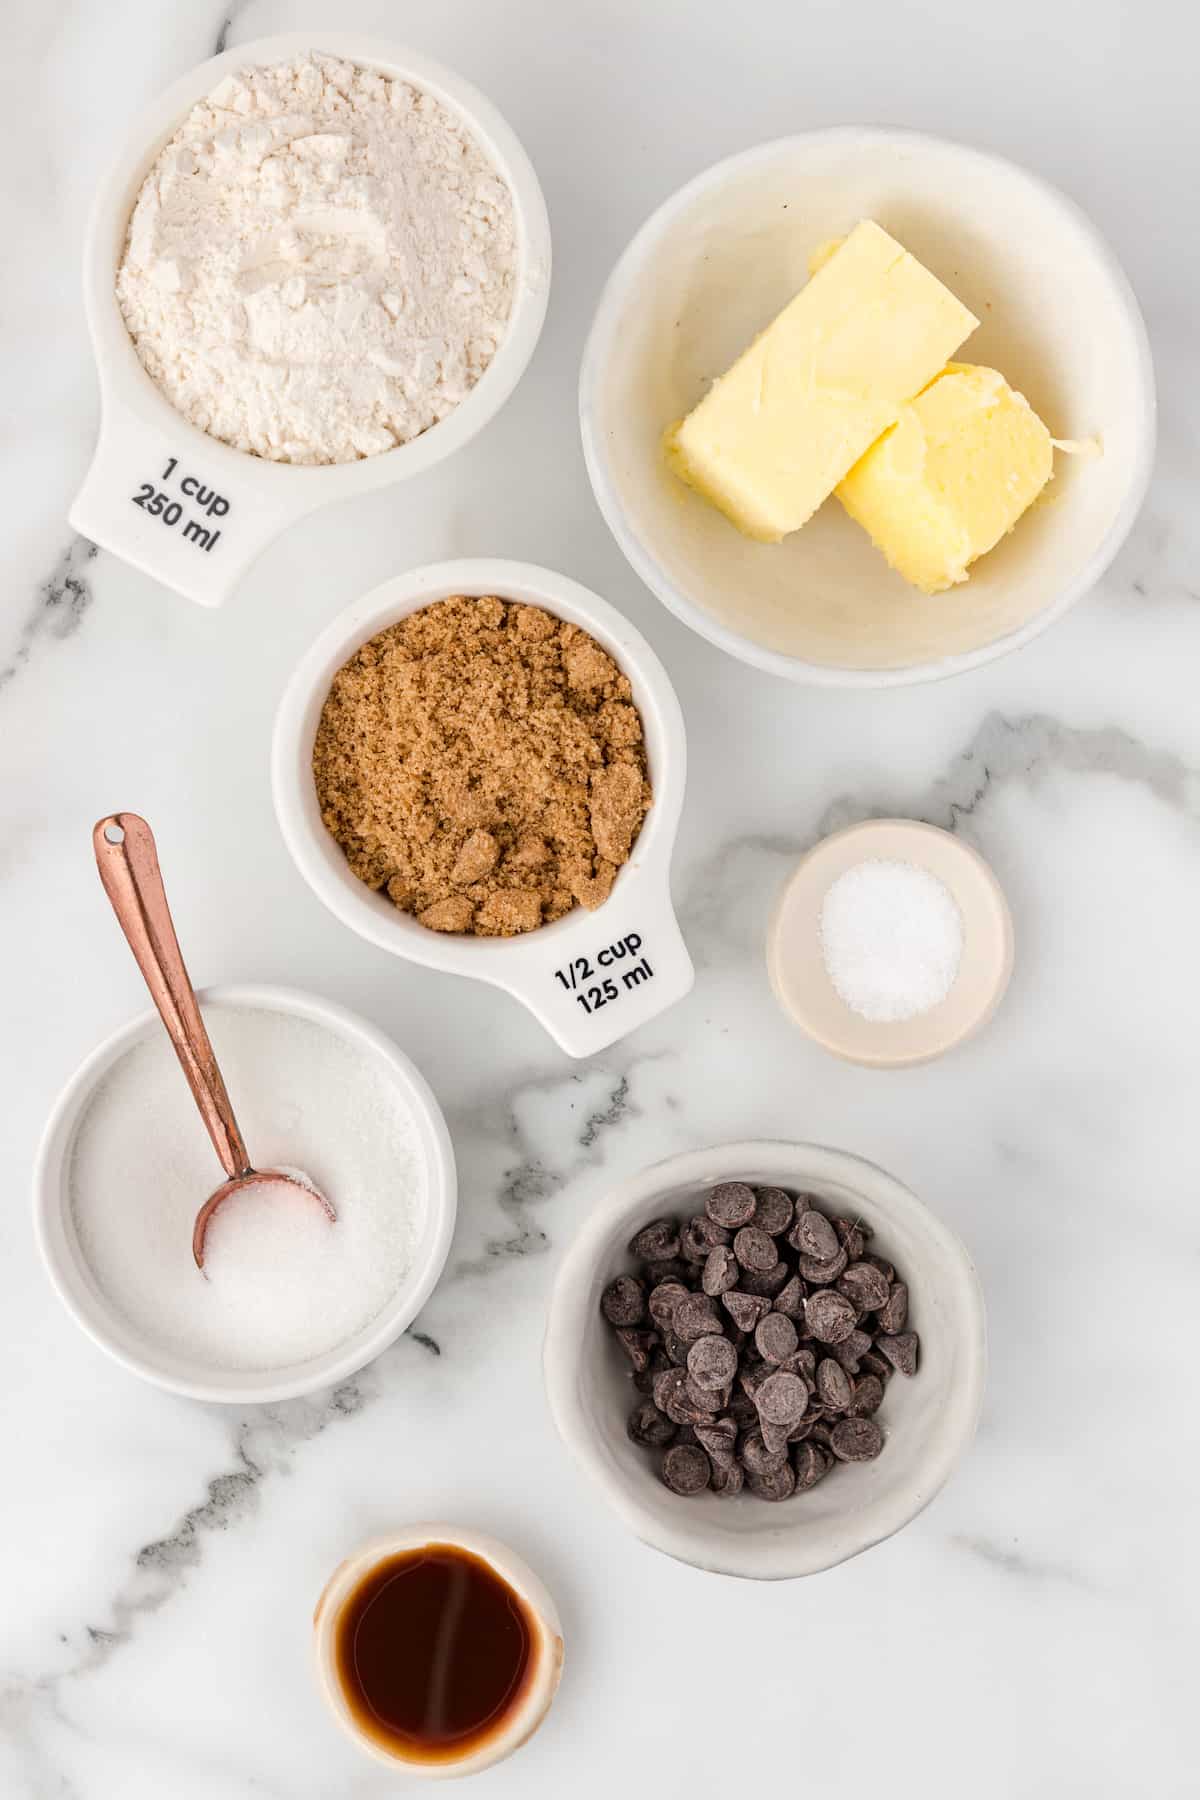 Edible Chocolate Chip Cookie Dough Ingredients